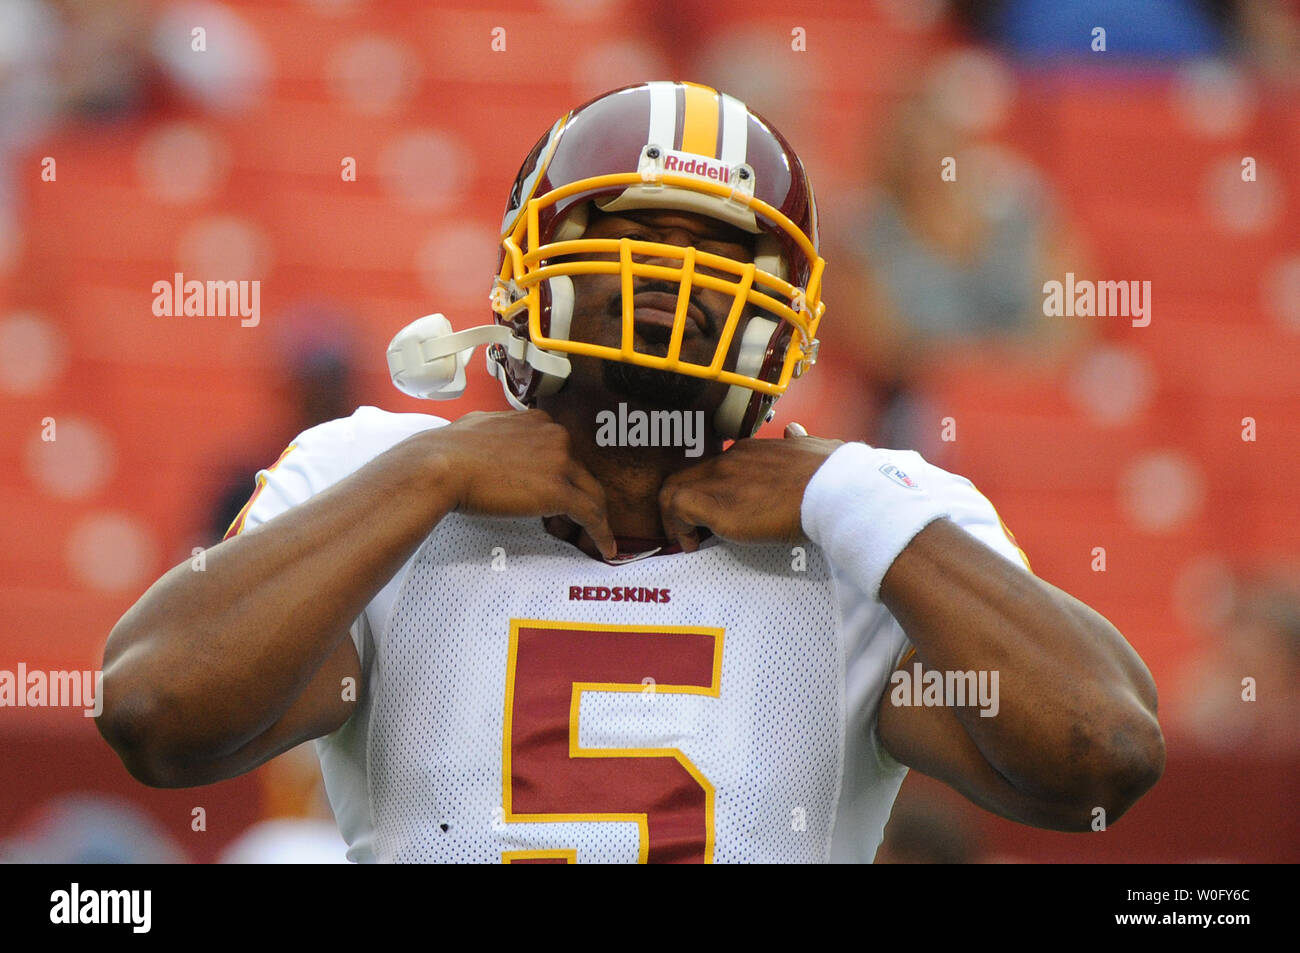 Washington Redskins' quarterback Donovan McNabb warms-up prior to the Redskins pre-season game against the Buffalo Bills at FedEx Field in Washington on August 13, 2010.   UPI/Kevin Dietsch Stock Photo